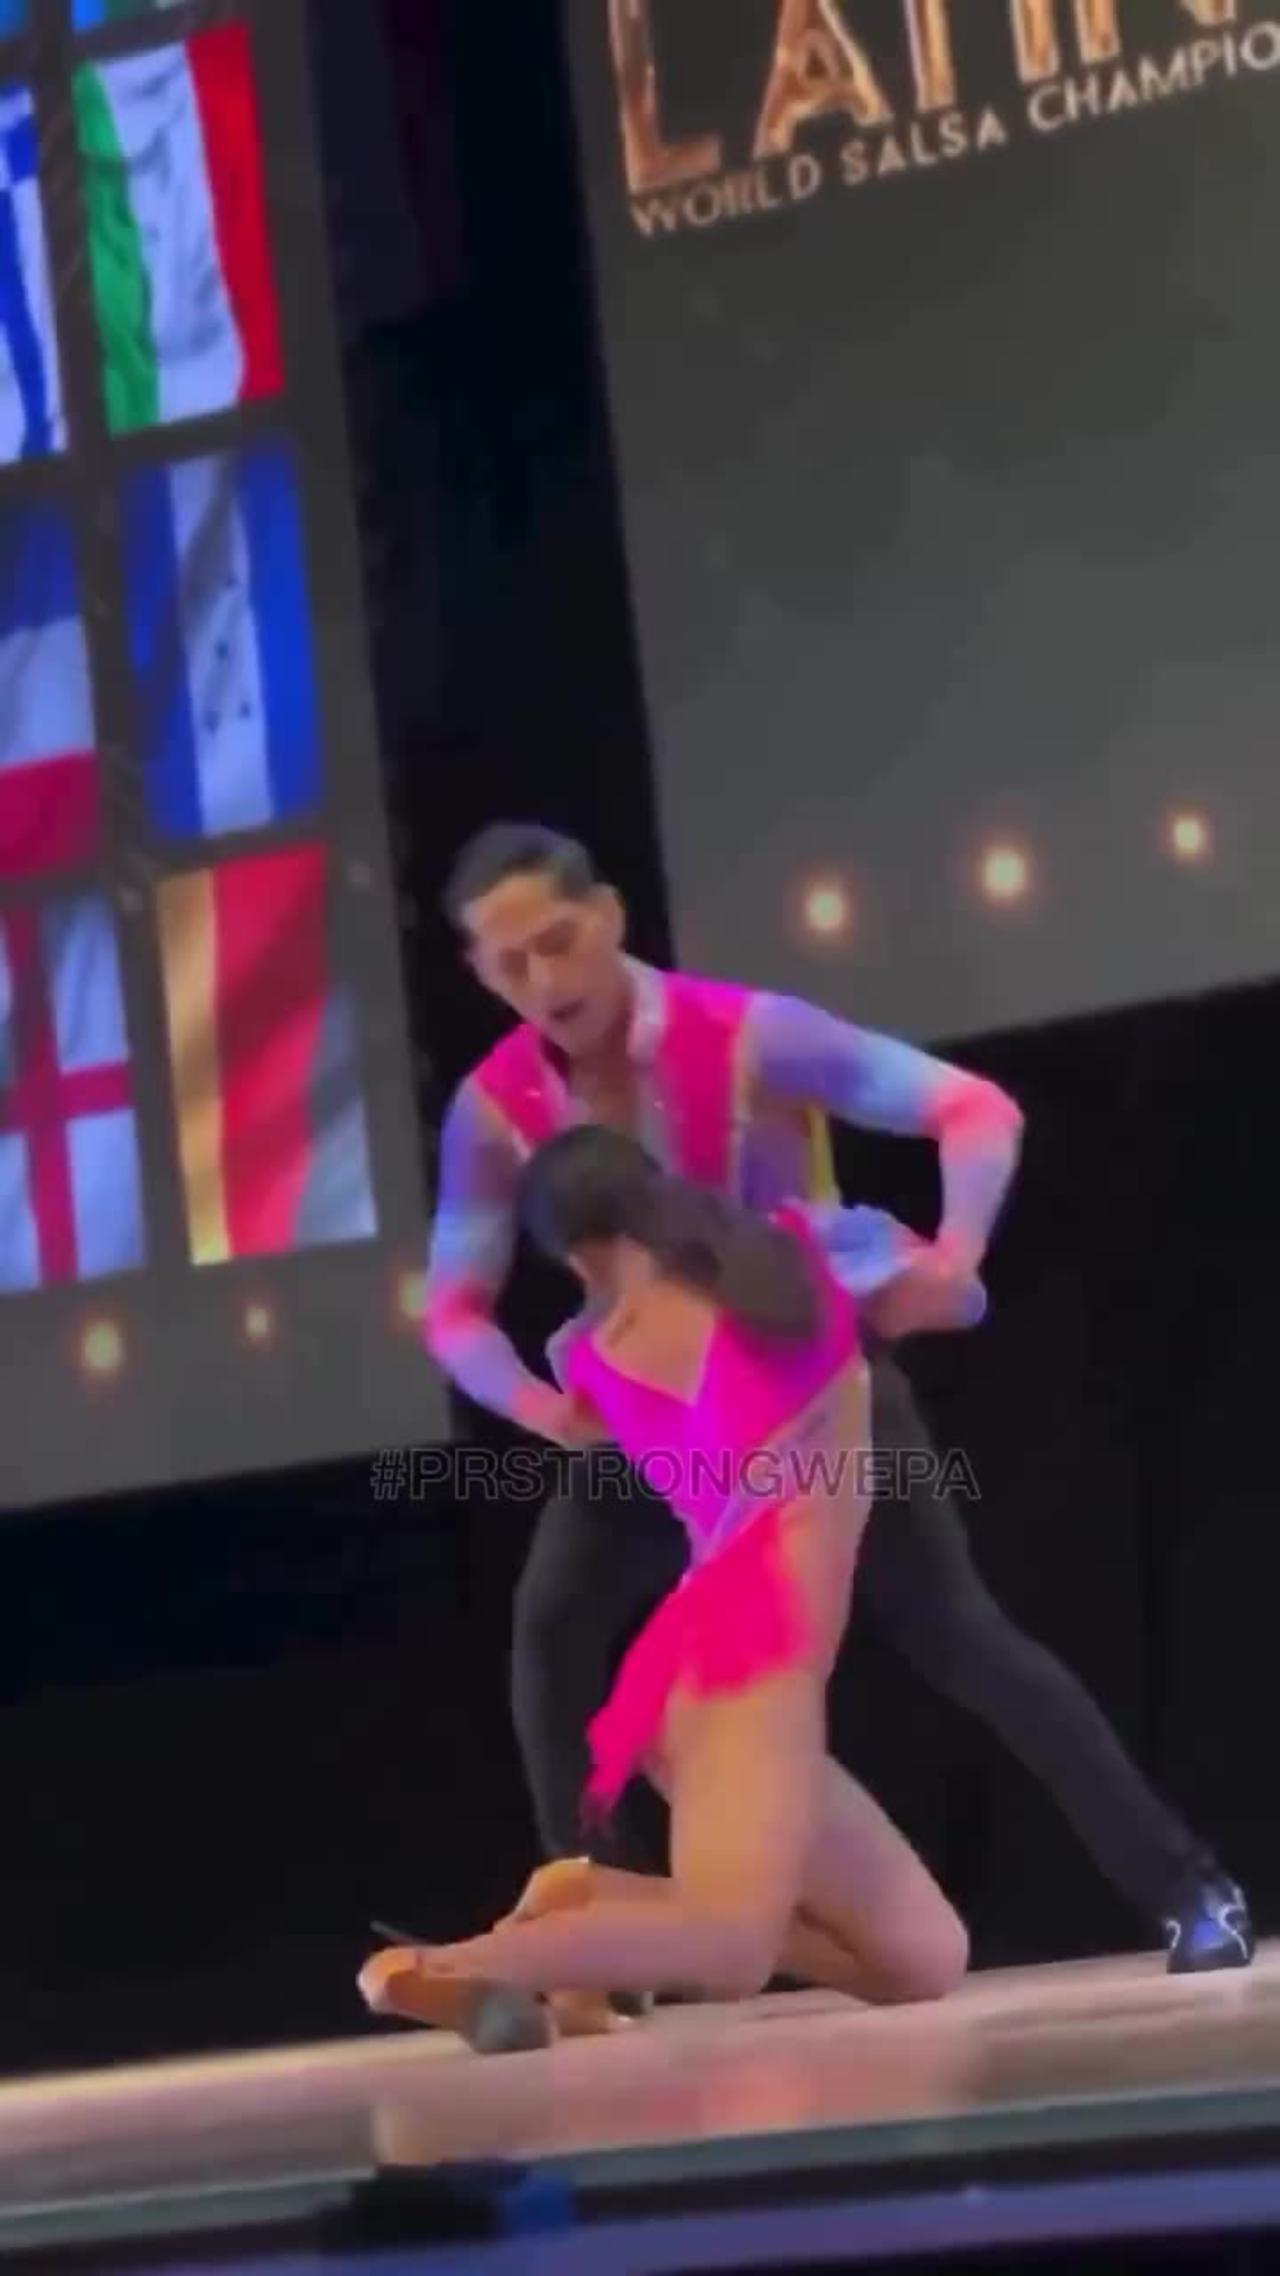 Woman falls in dance contest, keeps smiling